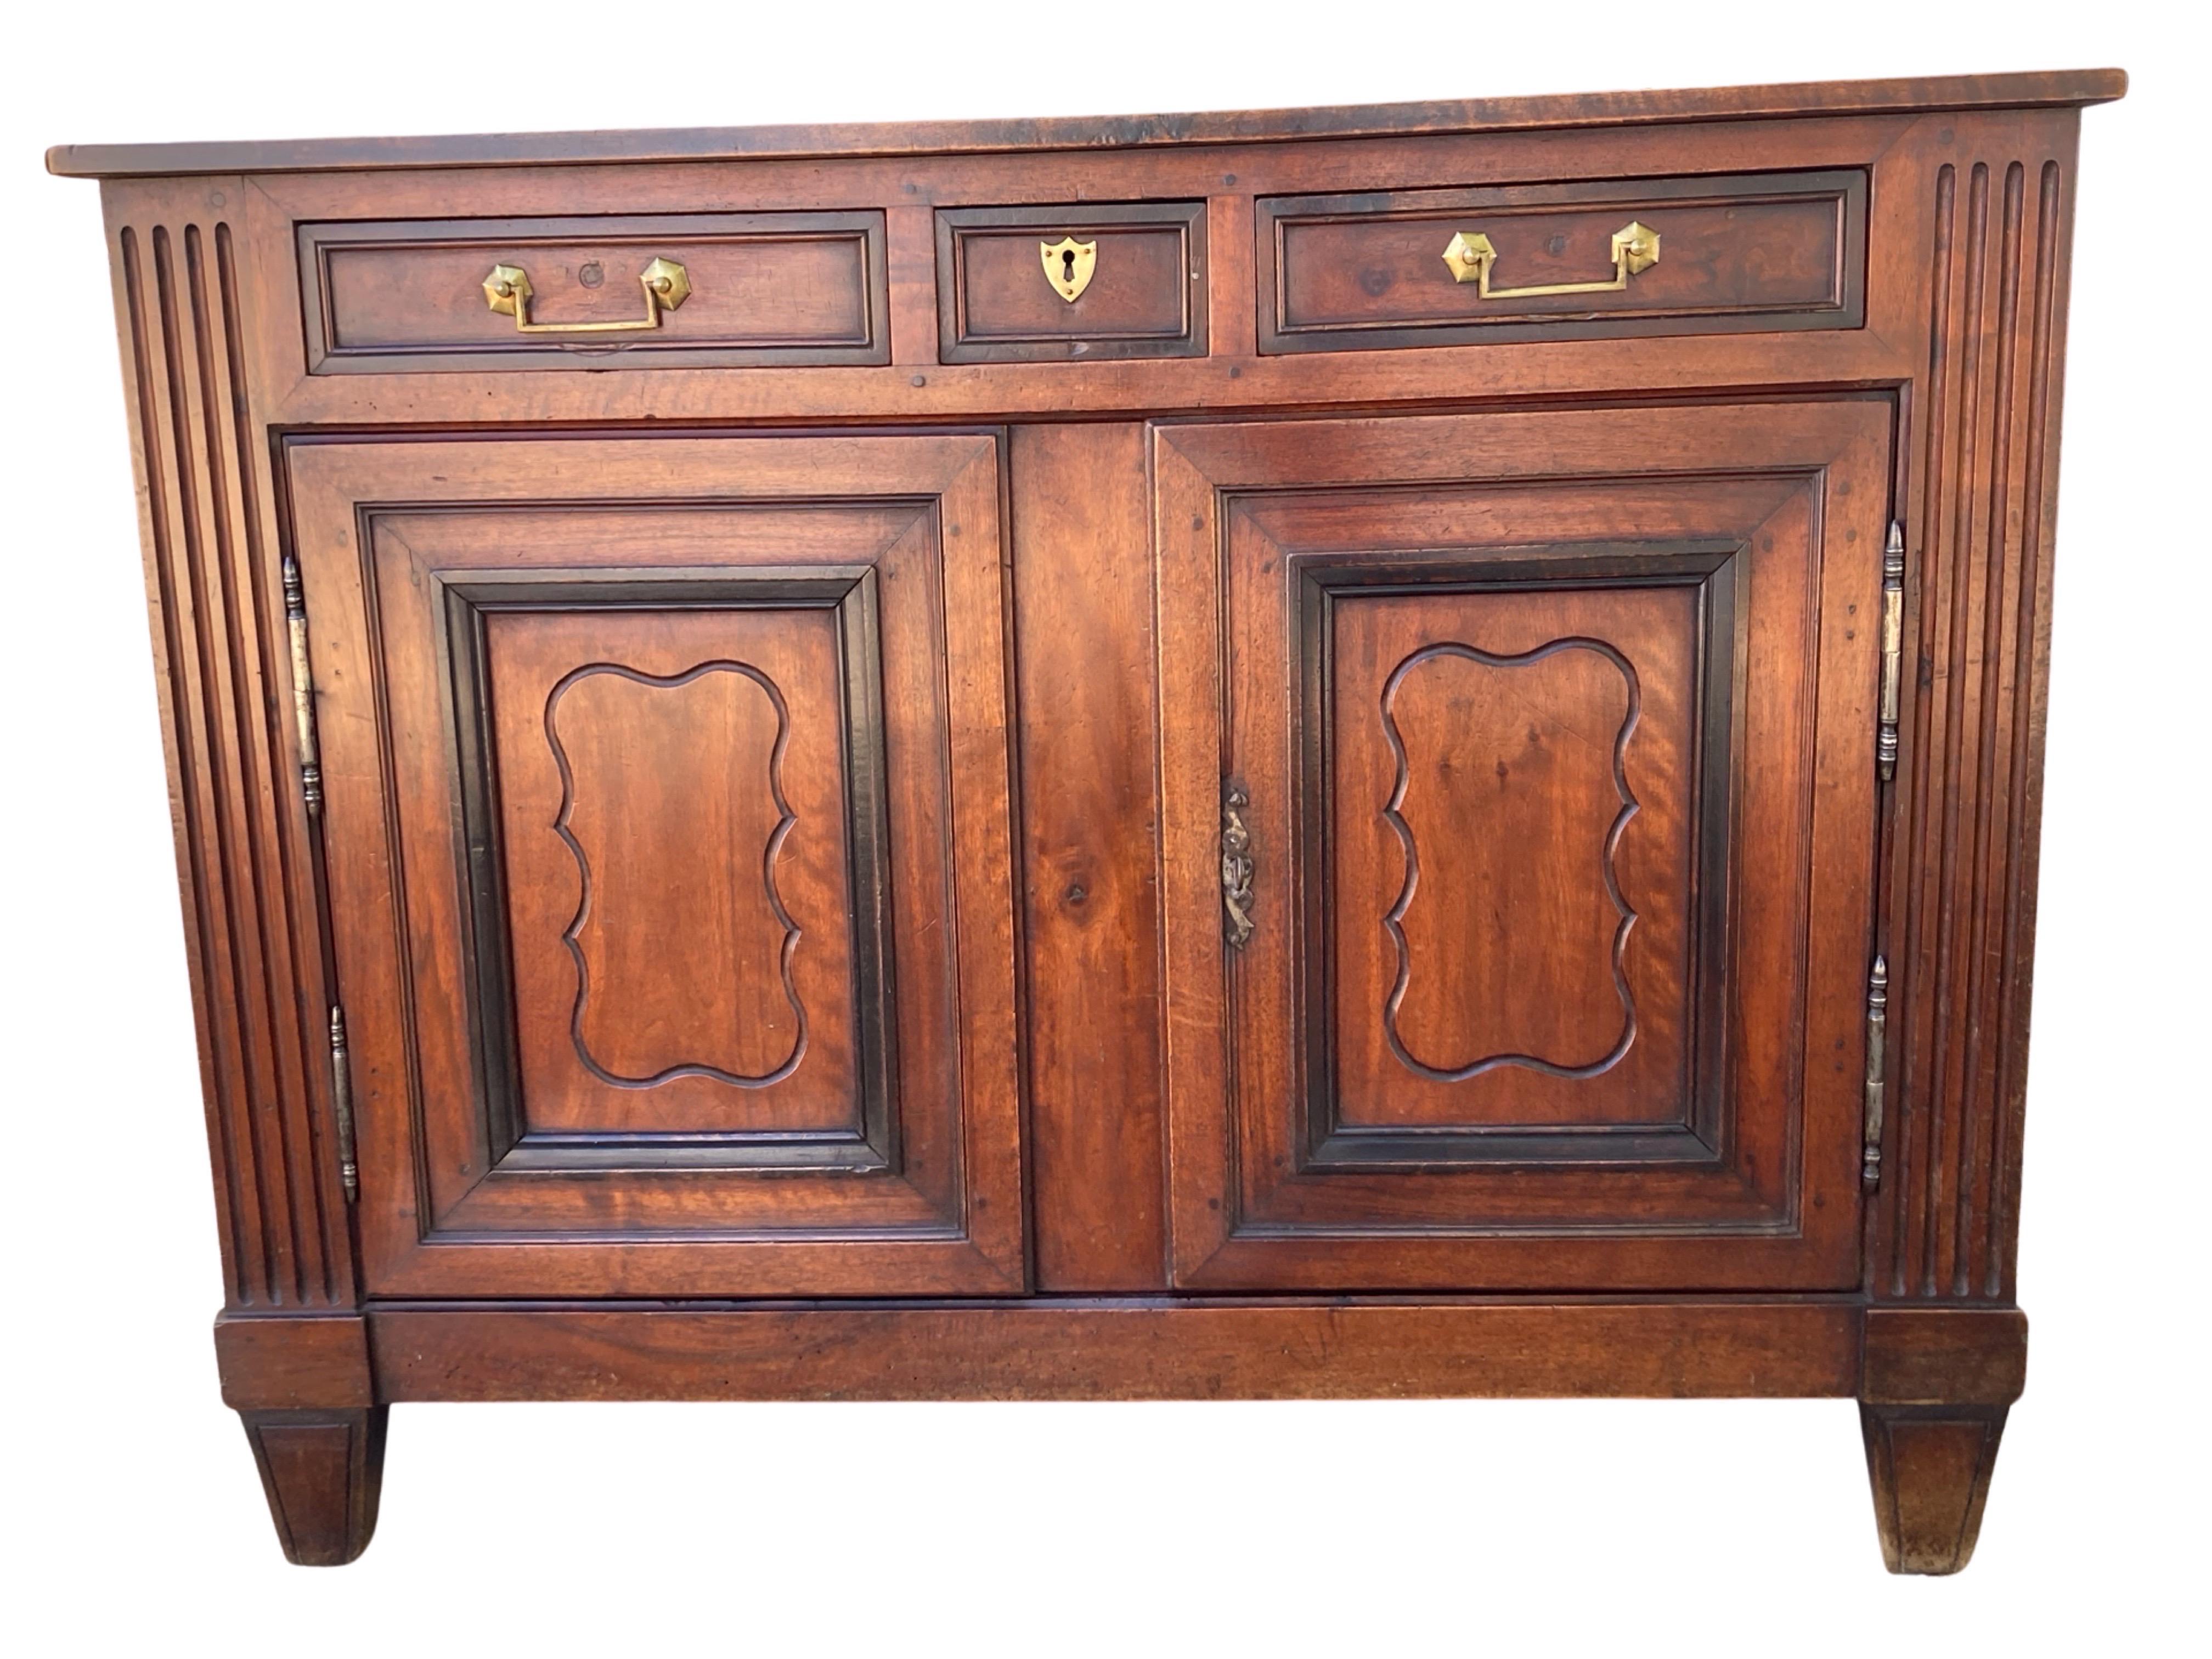 Directoire buffet hand-made in Southern France in the mid 1800s using walnut. The buffet shows a three on two composition with three drawers on top of two doors. The drawers are inset and the fronts are composed of a flat panel framed in darker